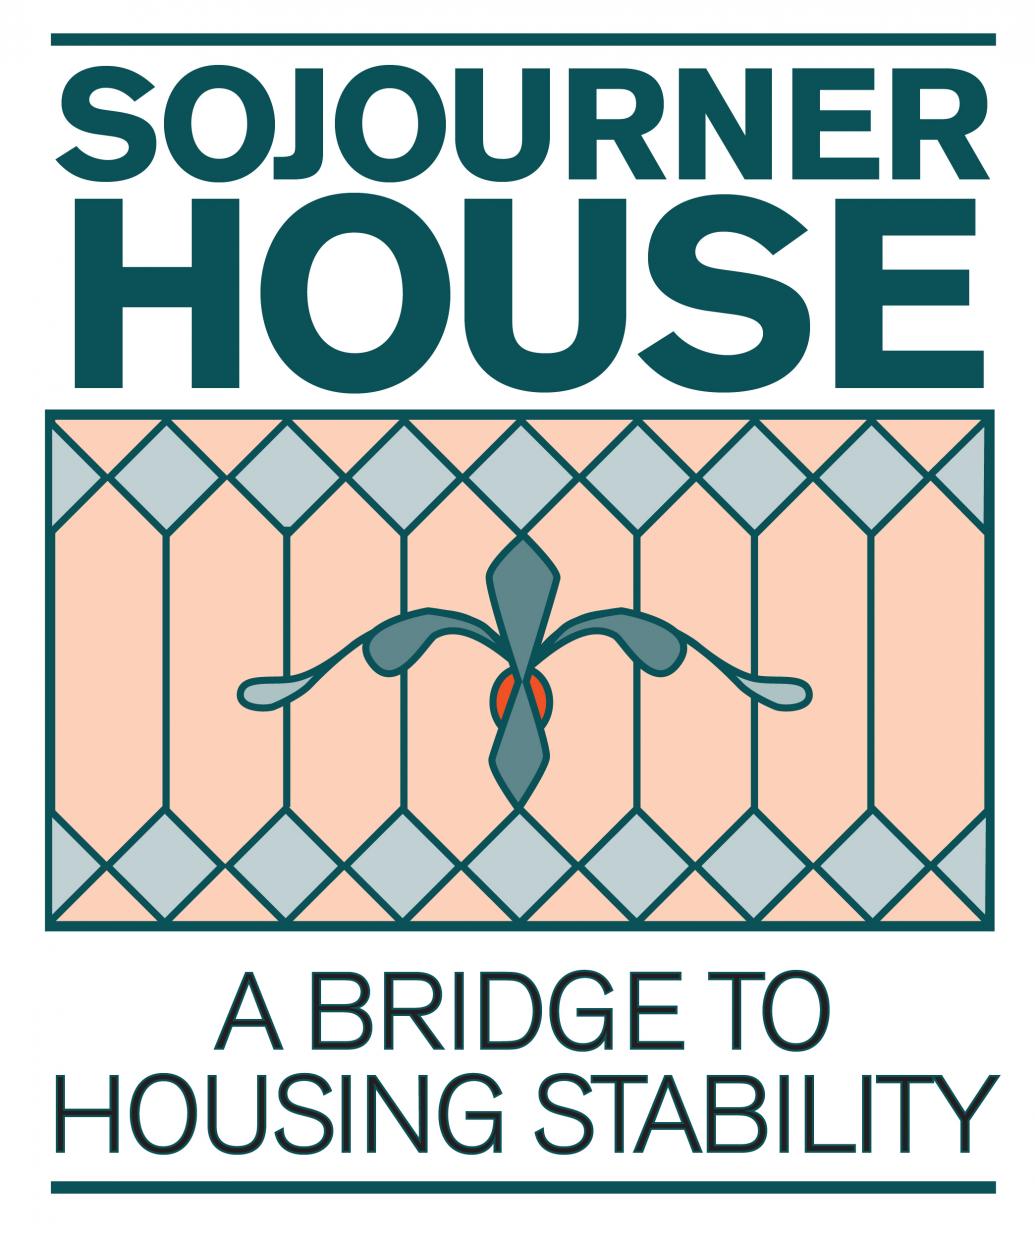 Offering a SOJOURN between homelessness and housing stability